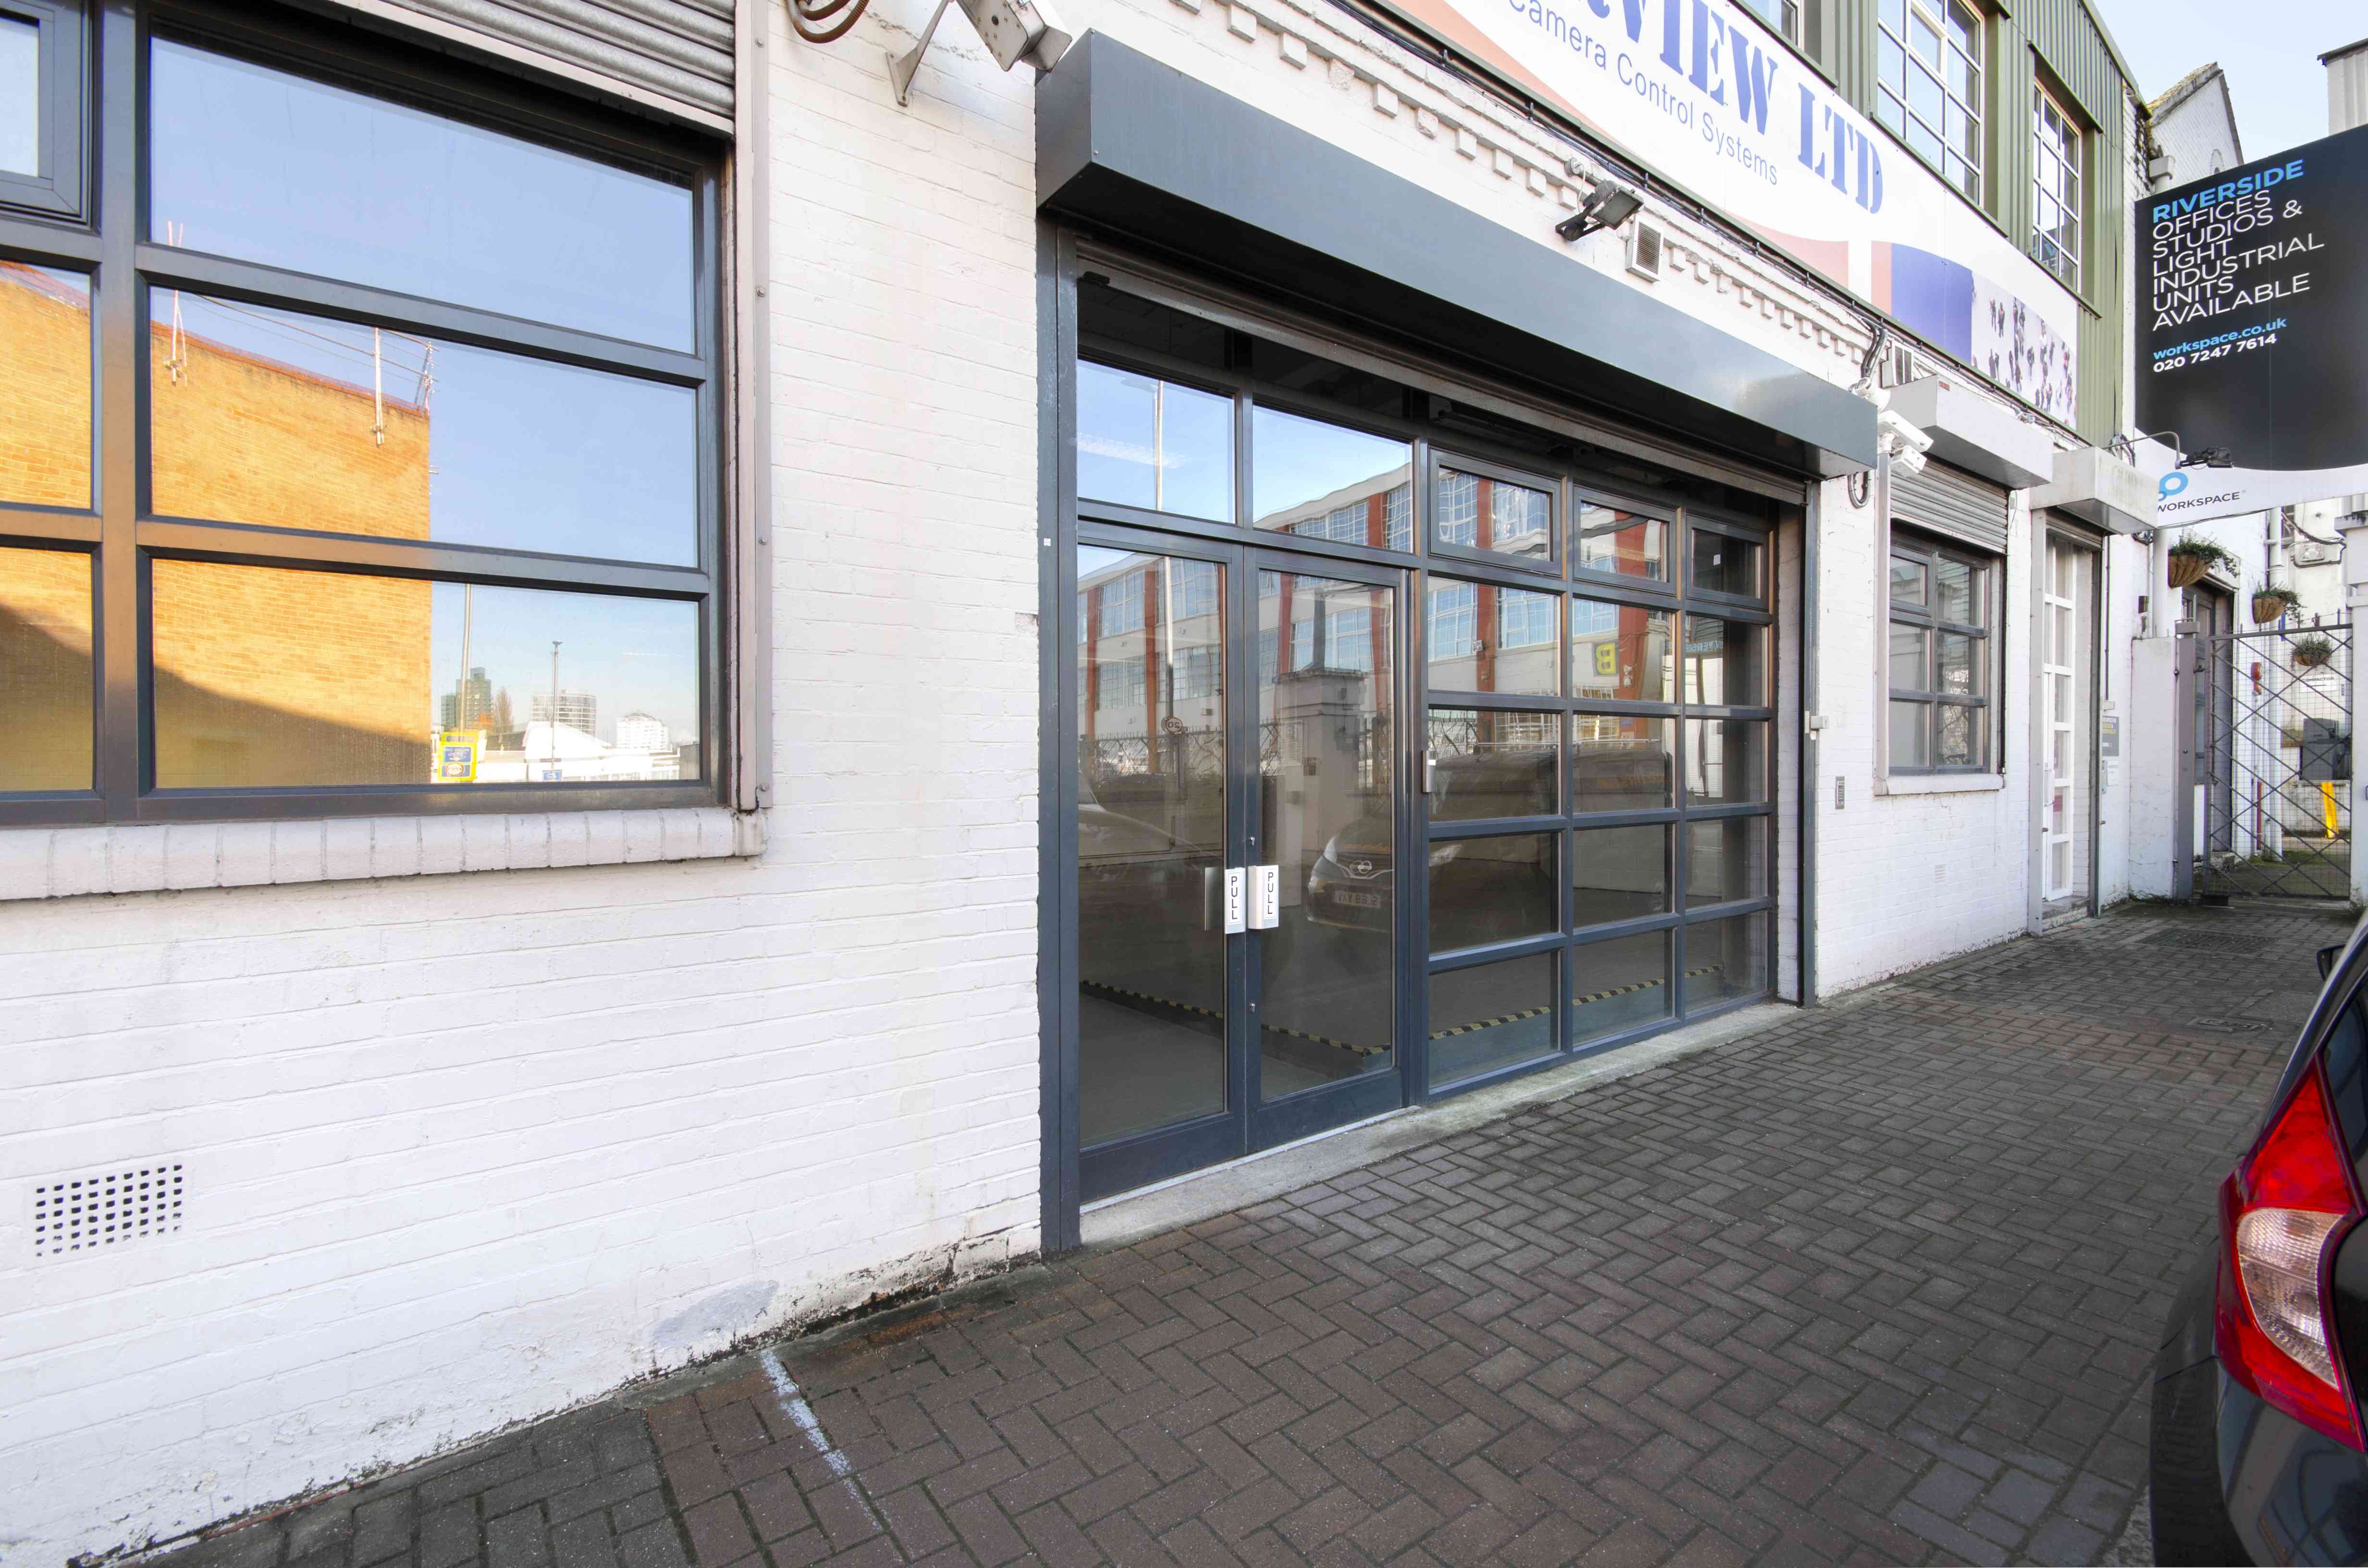 55 Bendon Valley Entrance, offices to let Wandsworth Workspace® | 55 Bendon Valley London 020 8108 5044